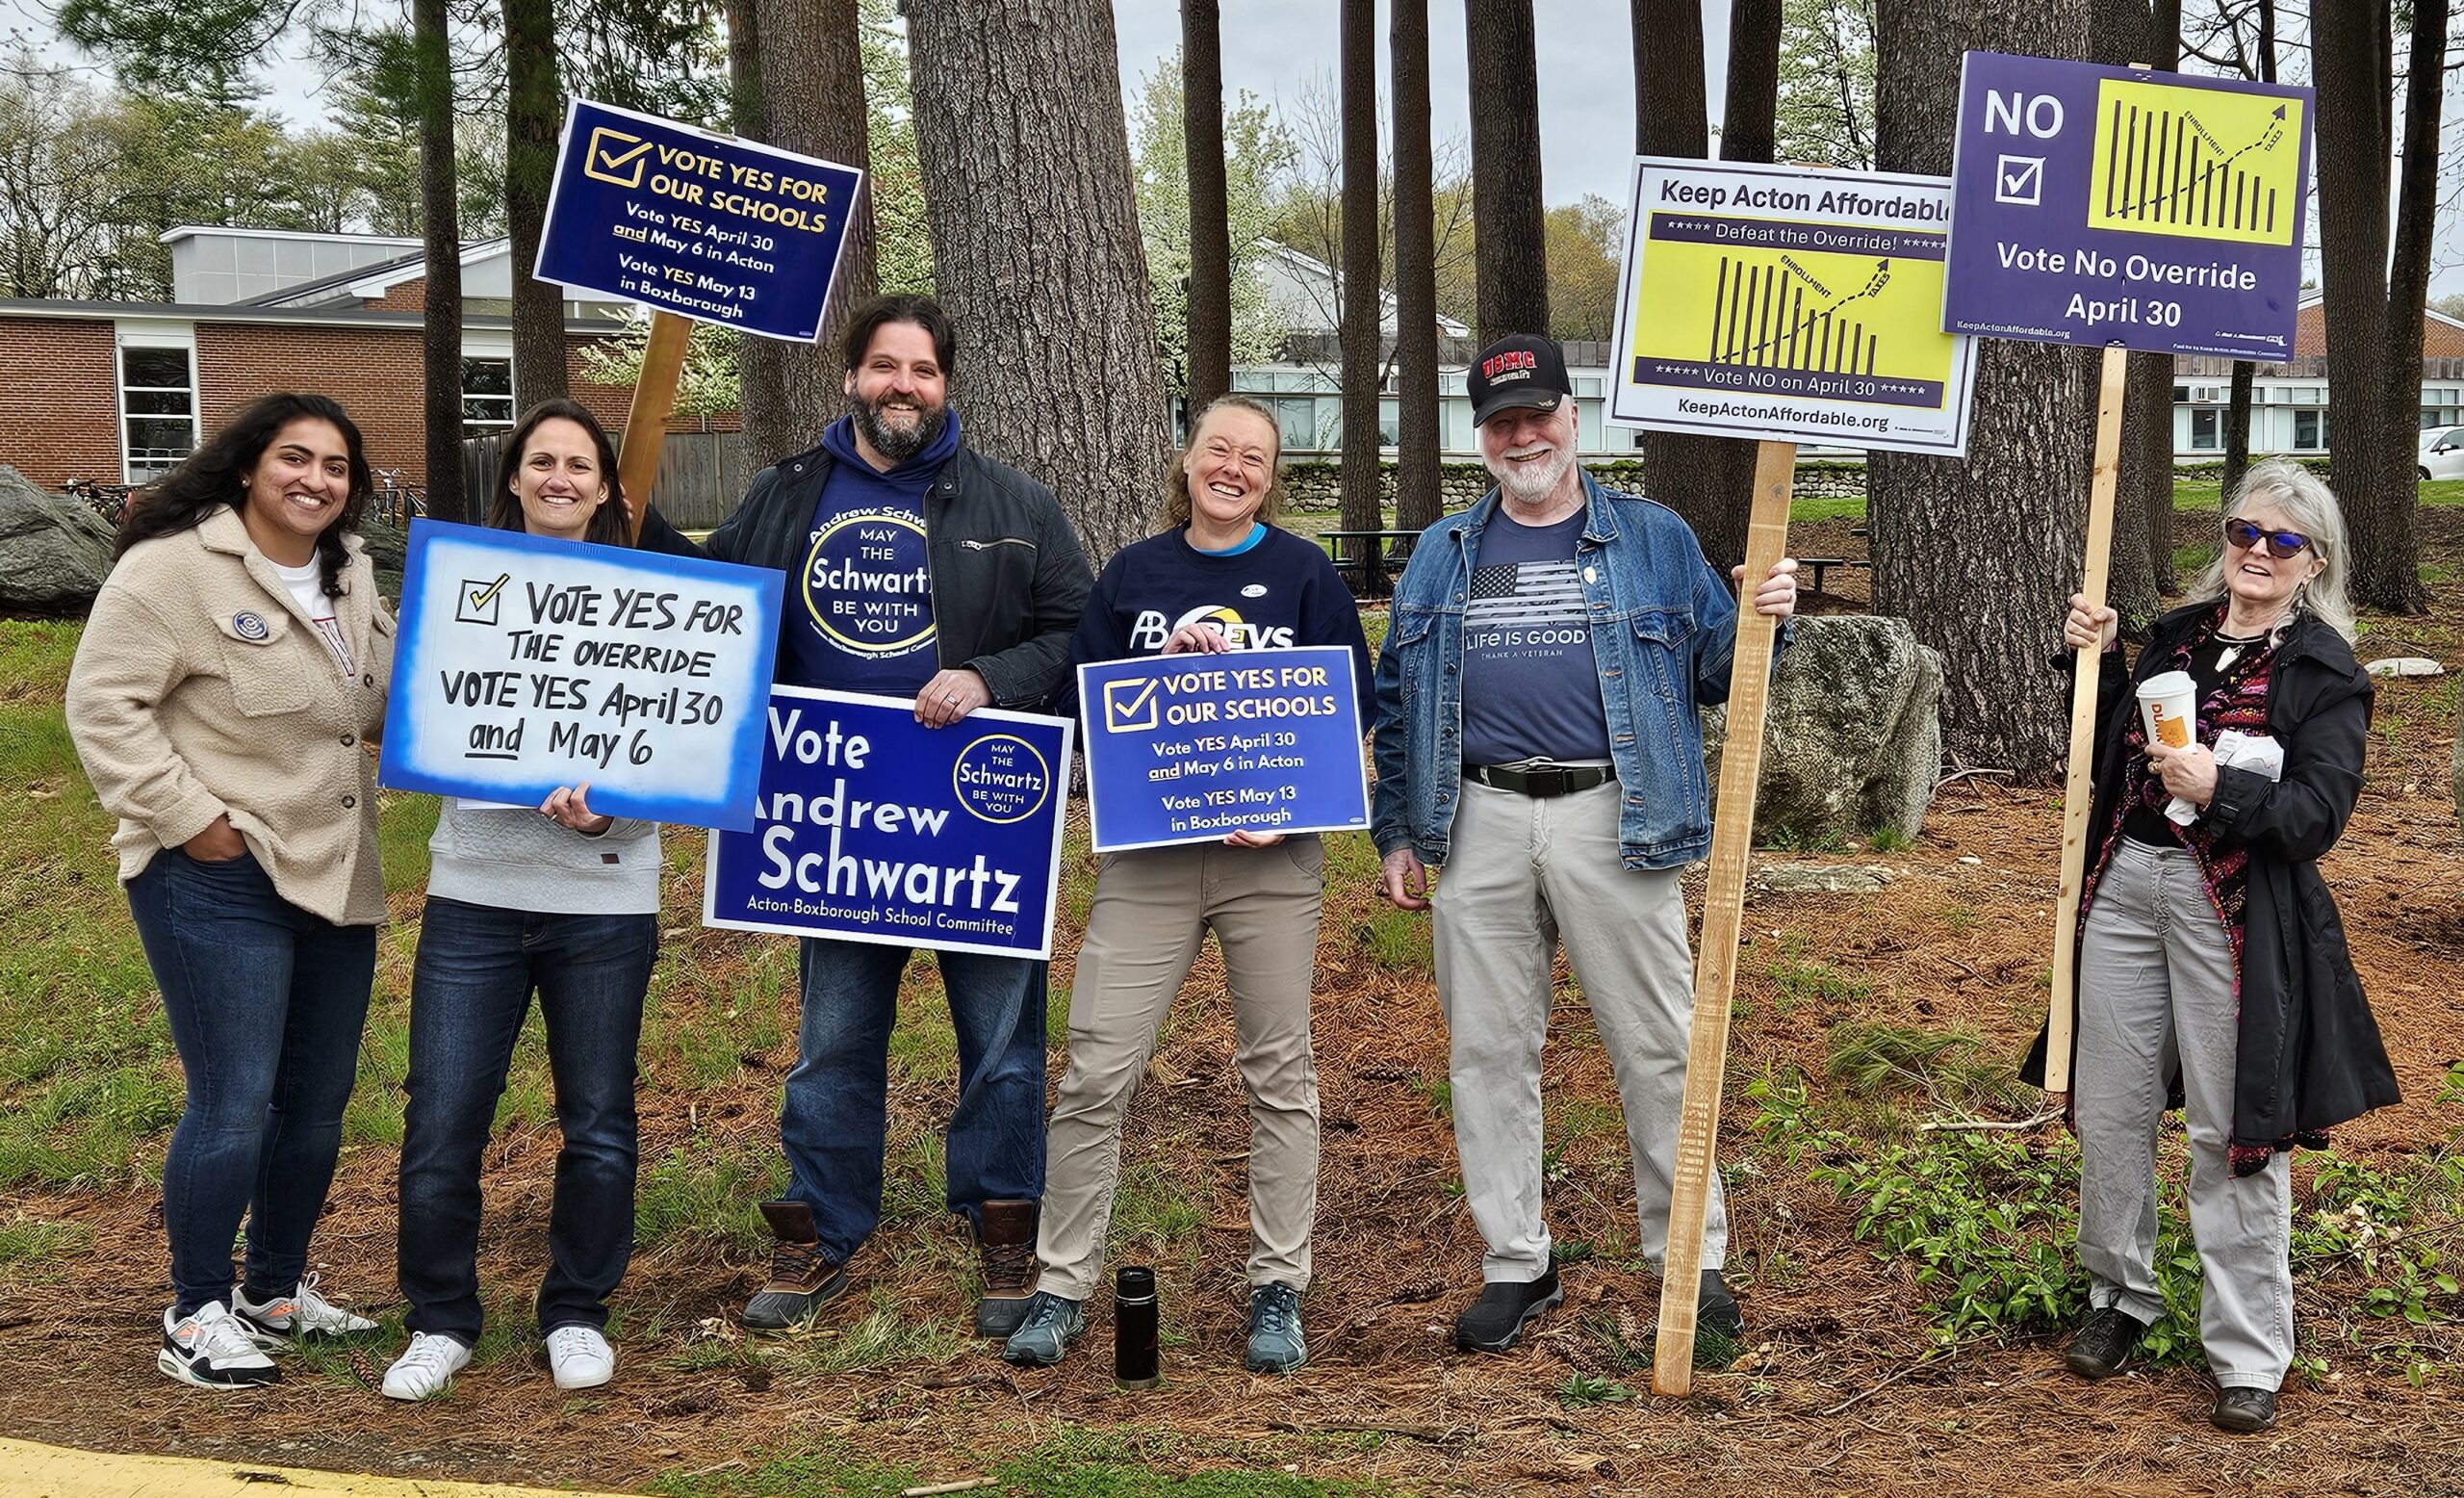 A group of 5 people smiling and holding political signs both for and against the override, Andrew Schwartz is also there, holding an Andrew Schwartz for School Committee sign.